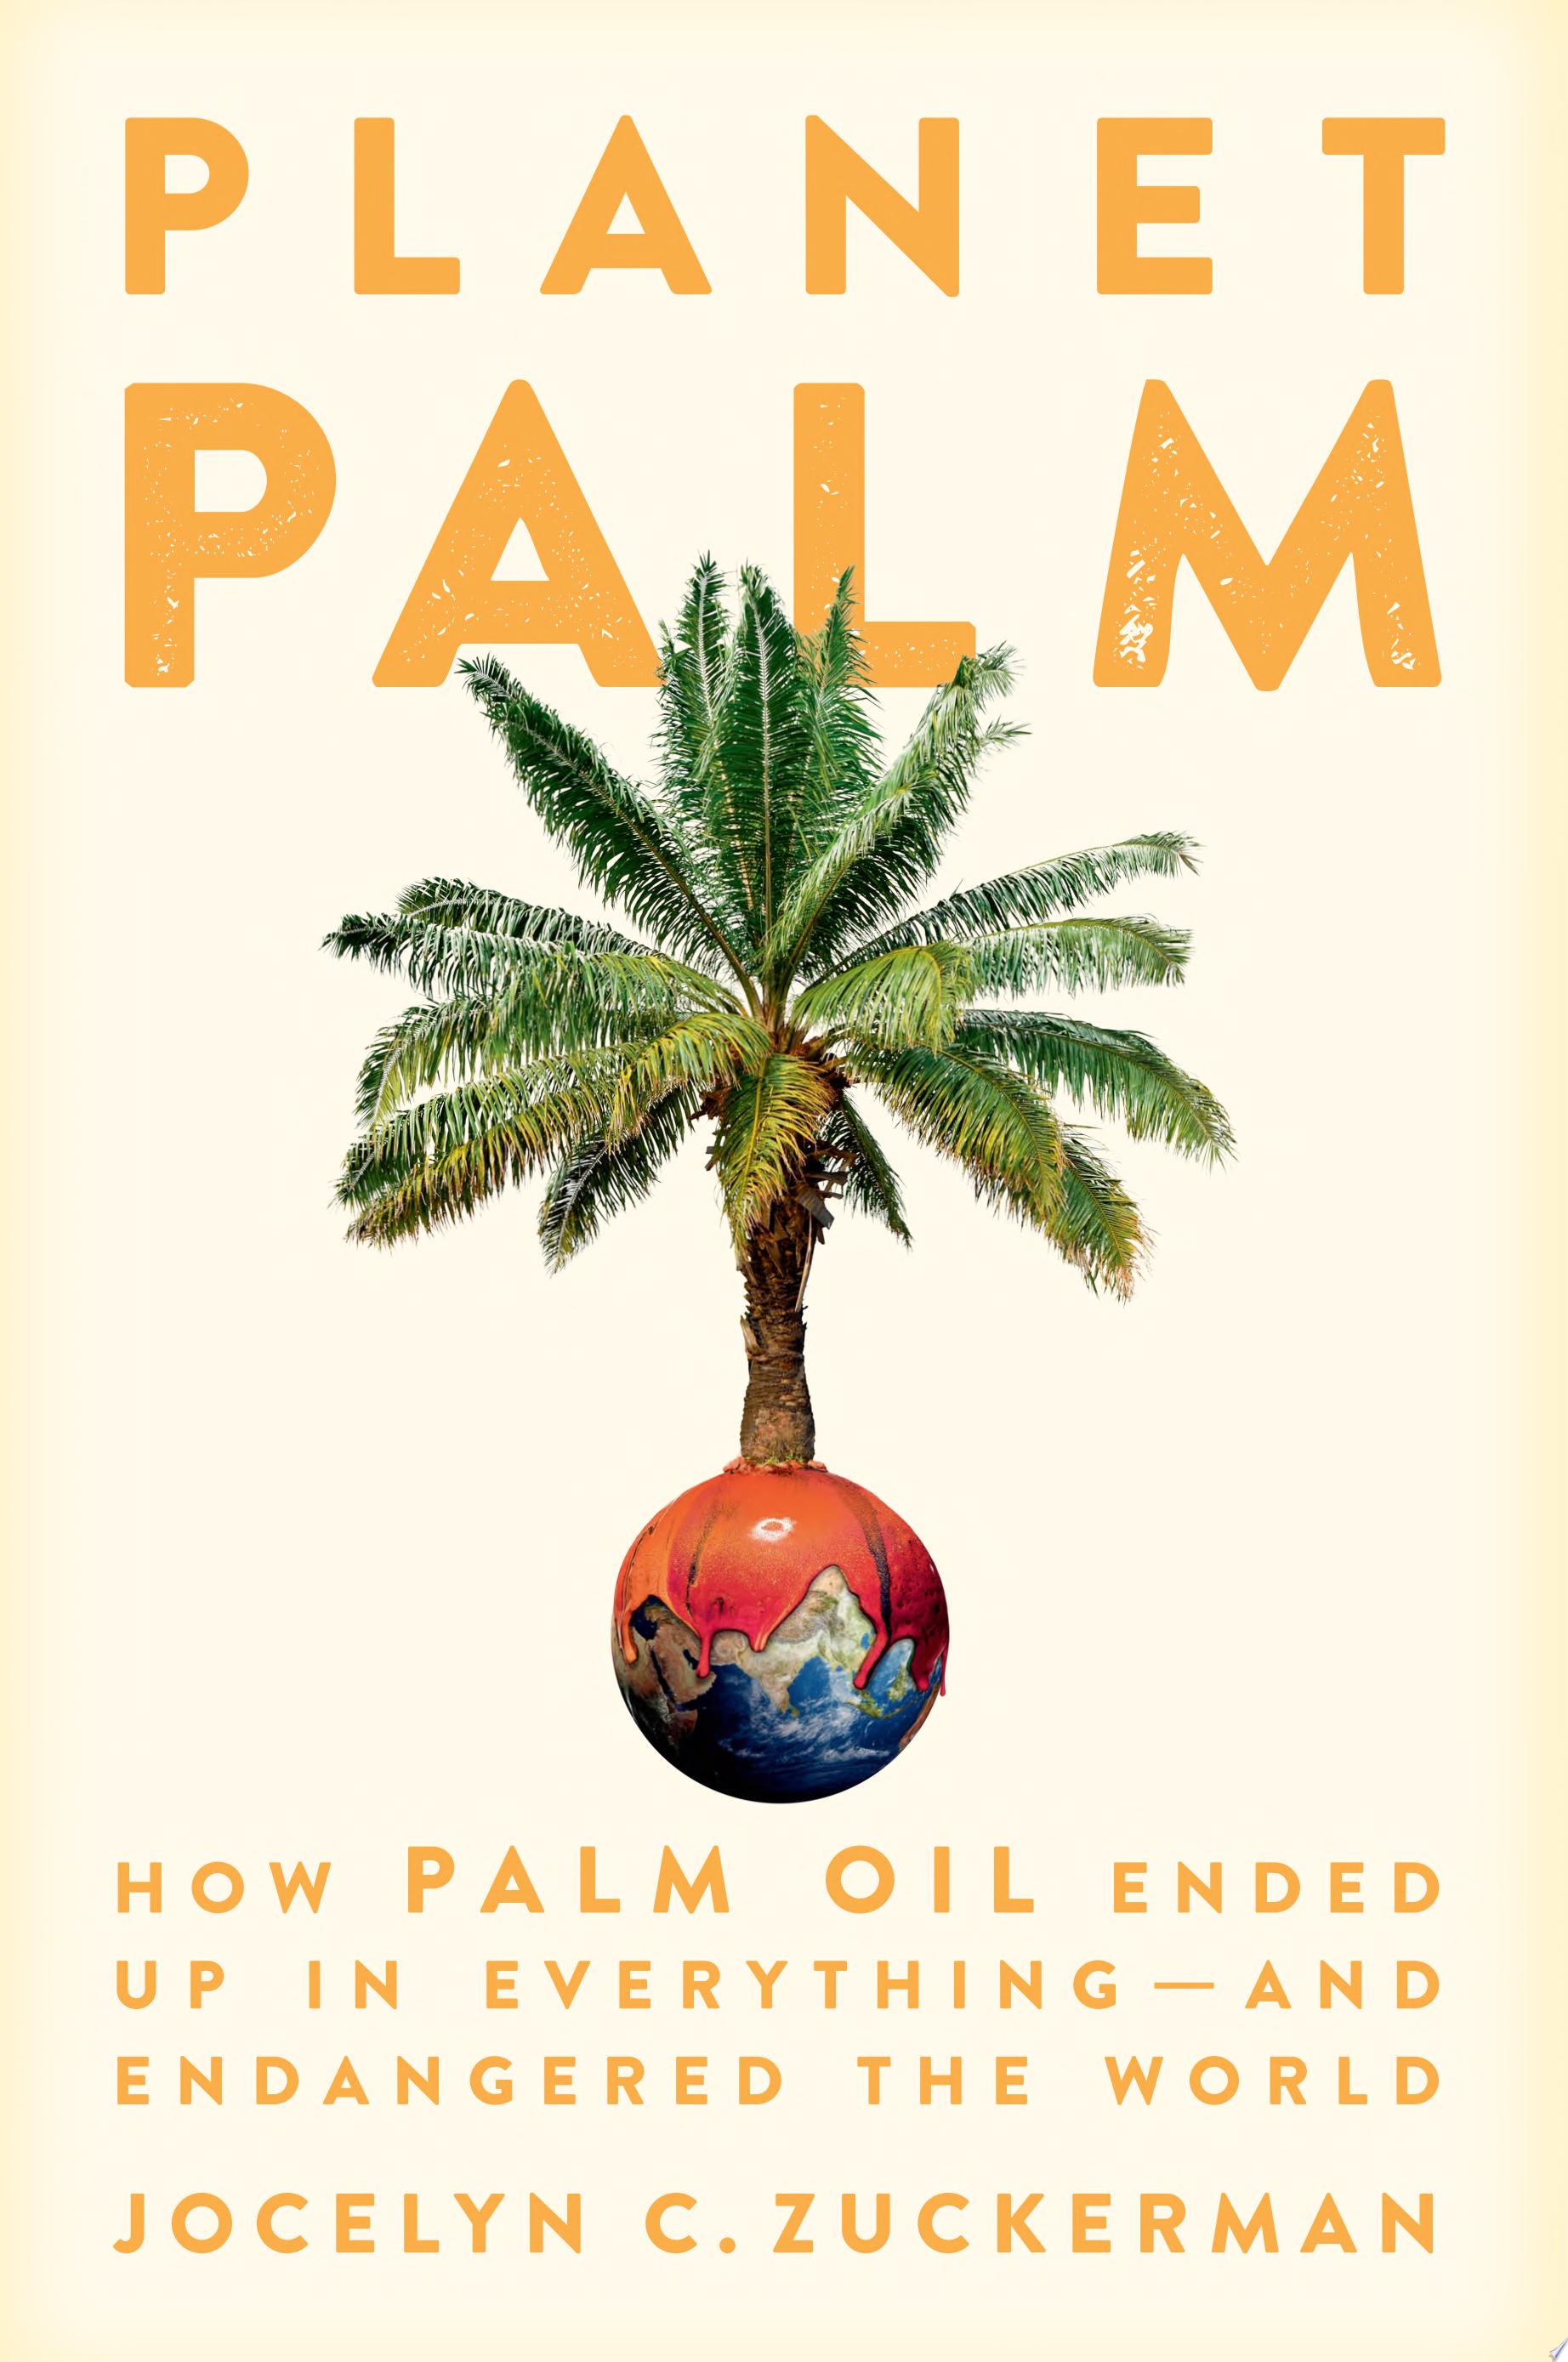 Image for "Planet Palm"